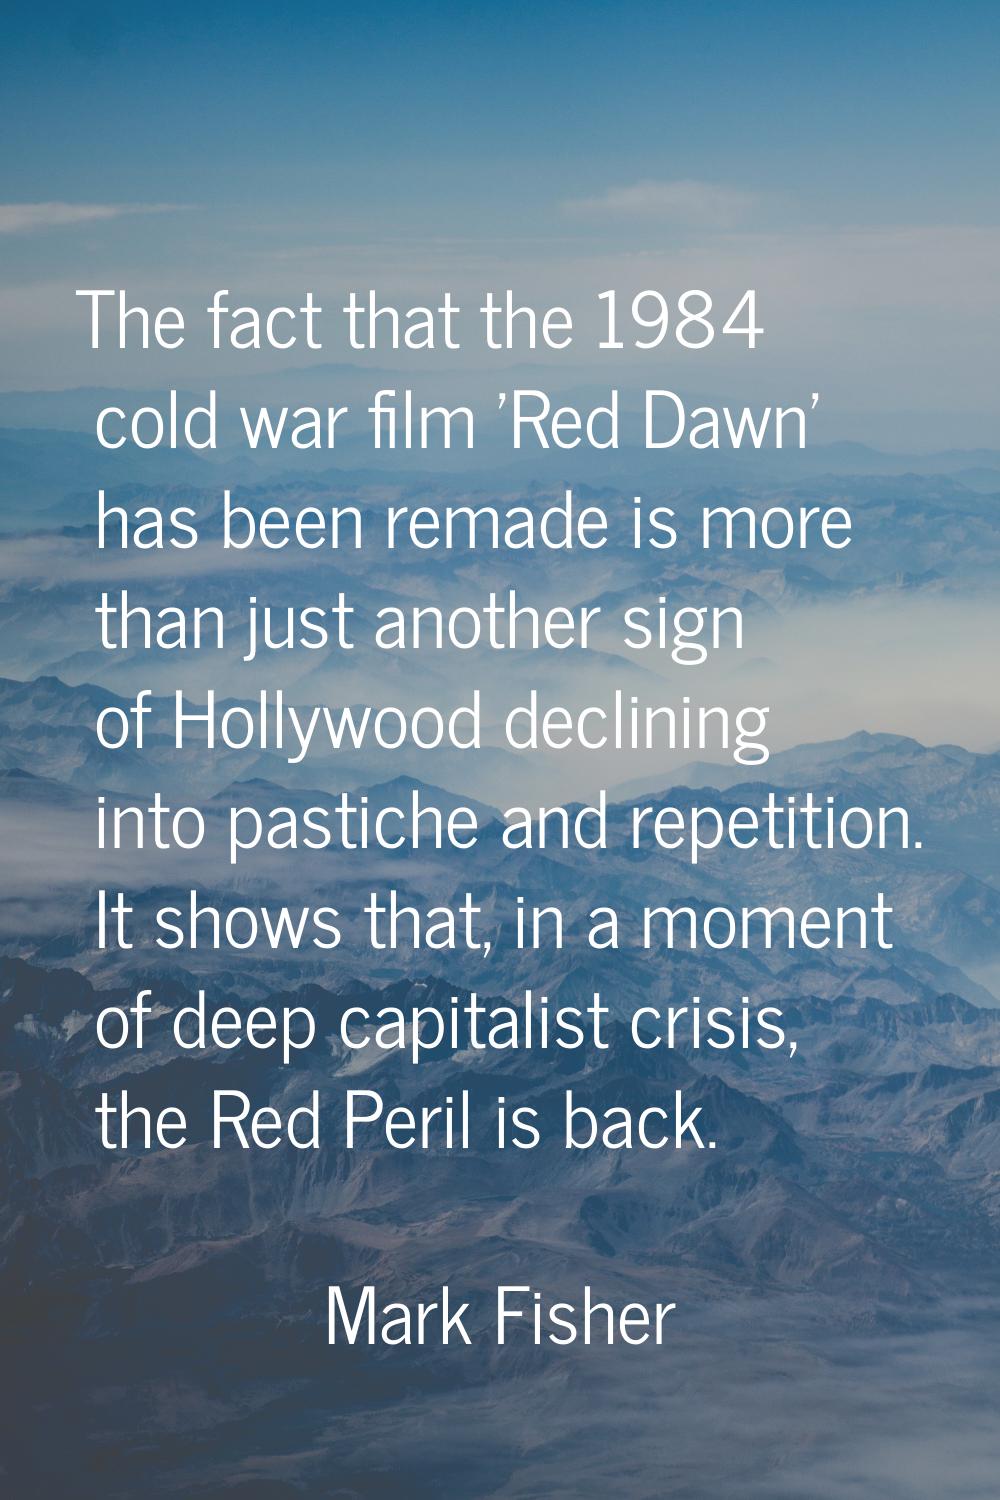 The fact that the 1984 cold war film 'Red Dawn' has been remade is more than just another sign of H